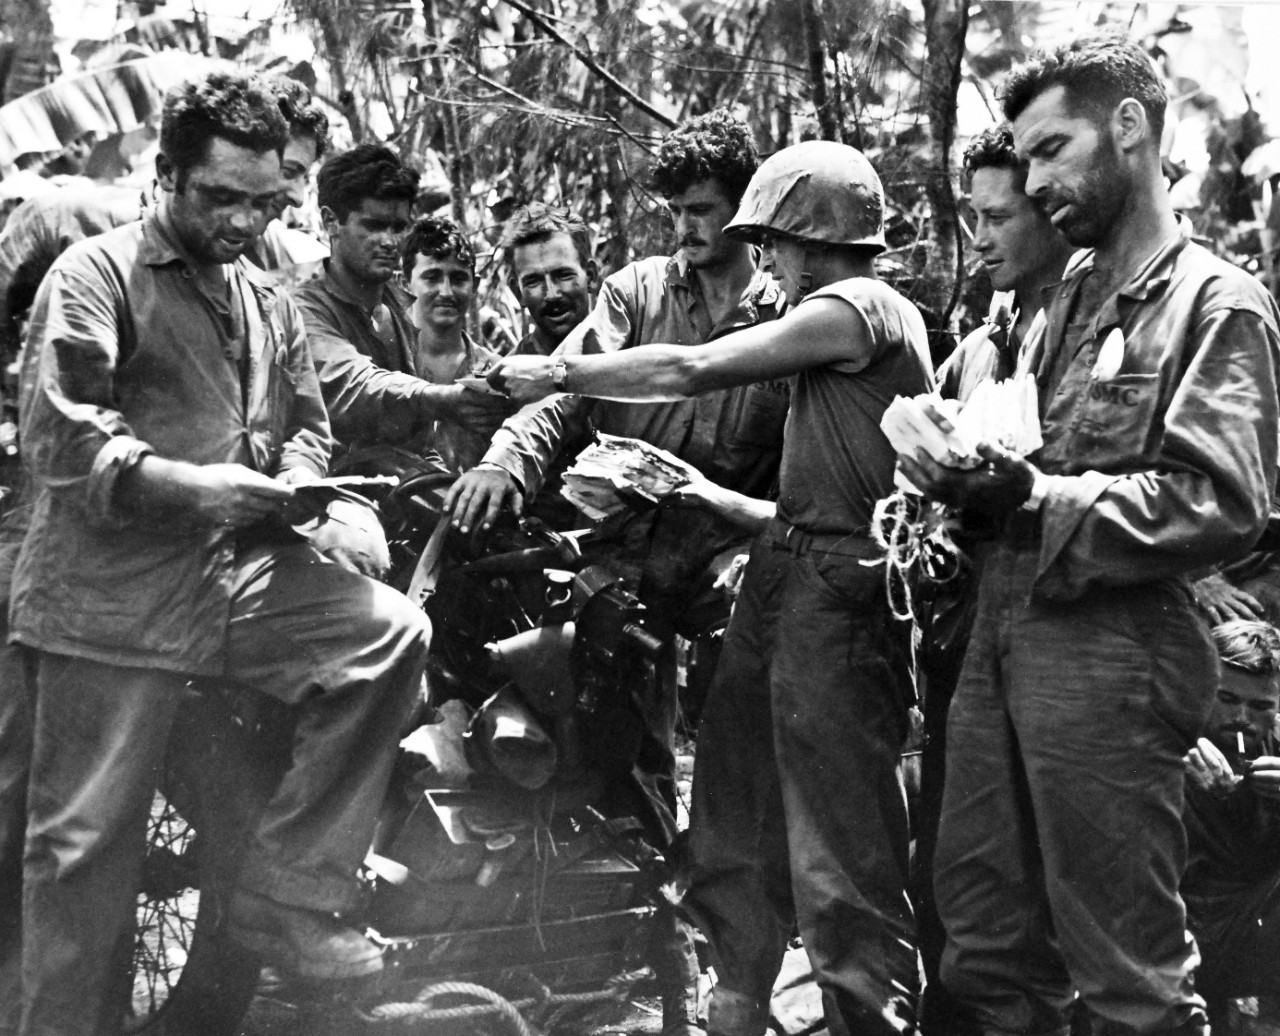 80-G-239321:  Invasion of Tinian, July-August 1944.      “Mail Call” on Tinian Island.  It took two Marines to hand out the first lot of mail that arrived, a week after the “Leathernecks” did, released August 5, 1944.    Official U.S. Navy photograph, now in the collections of the National Archives.  (2017/03/07).